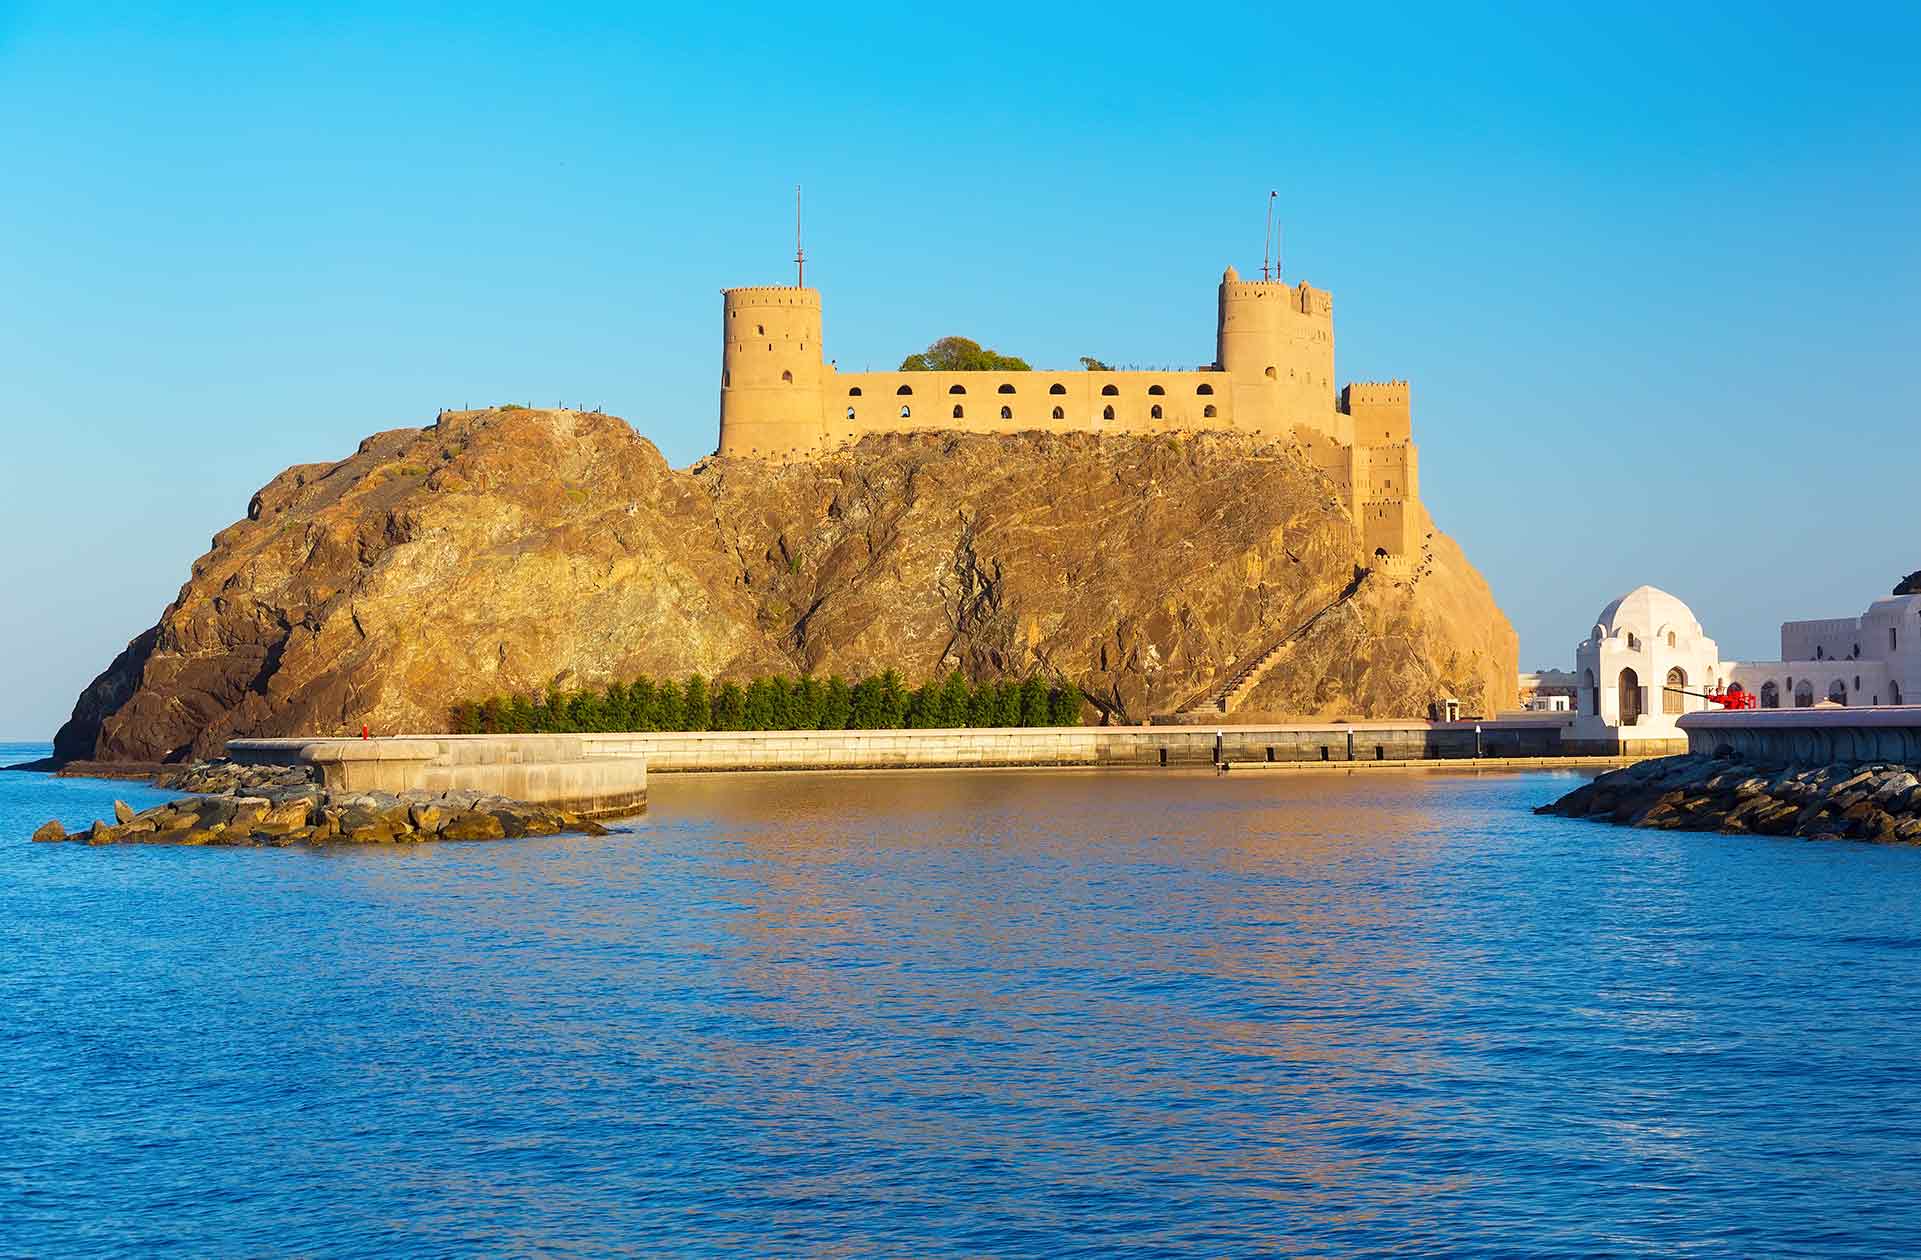 Fort Al-Jalali in Muscat, Oman.Impressive twin forts at the entrance of Old Muscat's harbor near Sultan Qaboos palace. View from Al-Mirani fort area